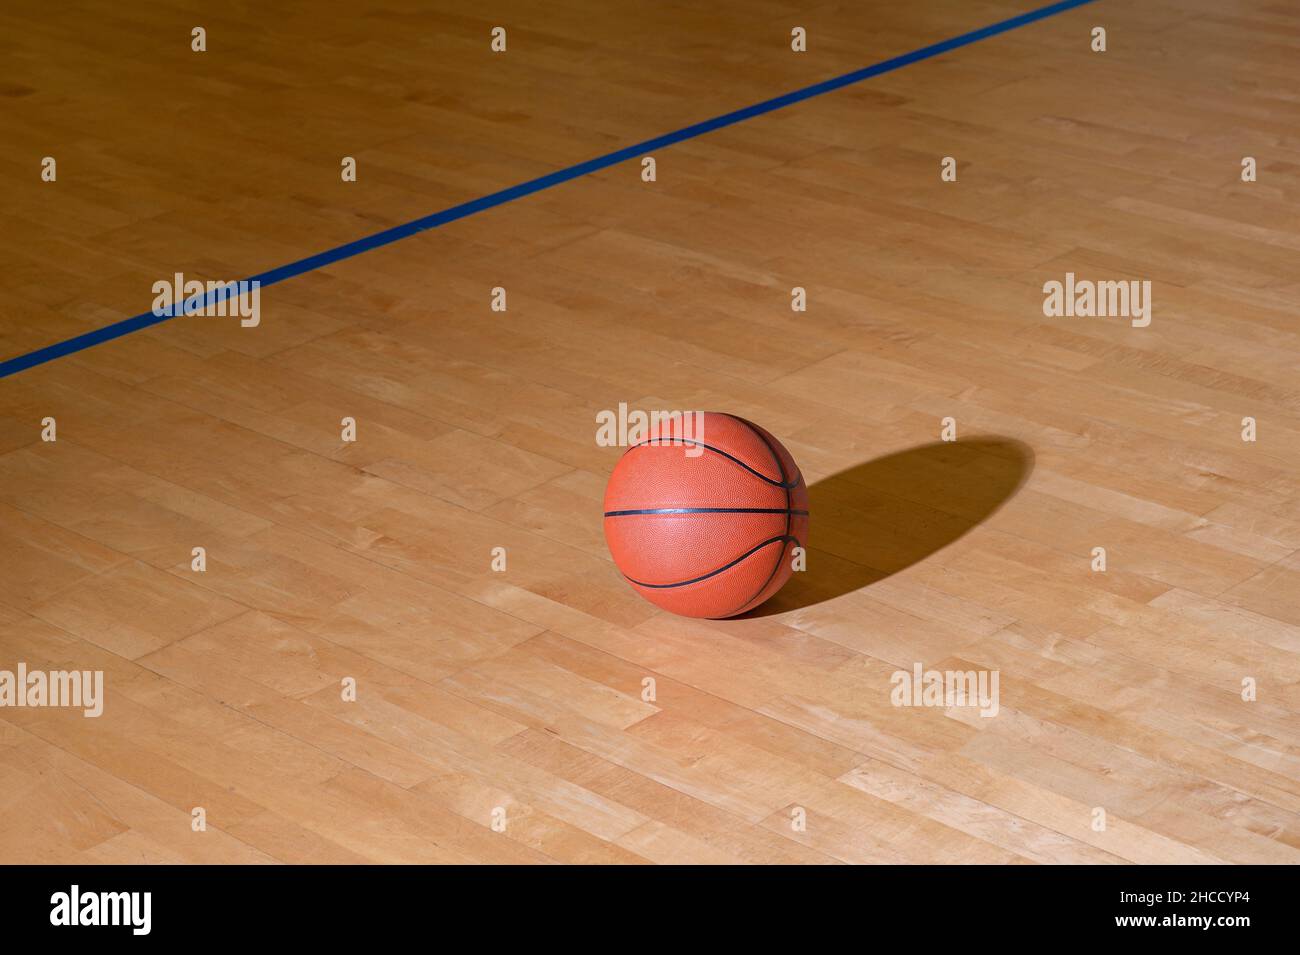 Basketball on hardwood court floor with natural lighting. Workout online concept. Horizontal sport theme poster, greeting cards, headers, website and Stock Photo